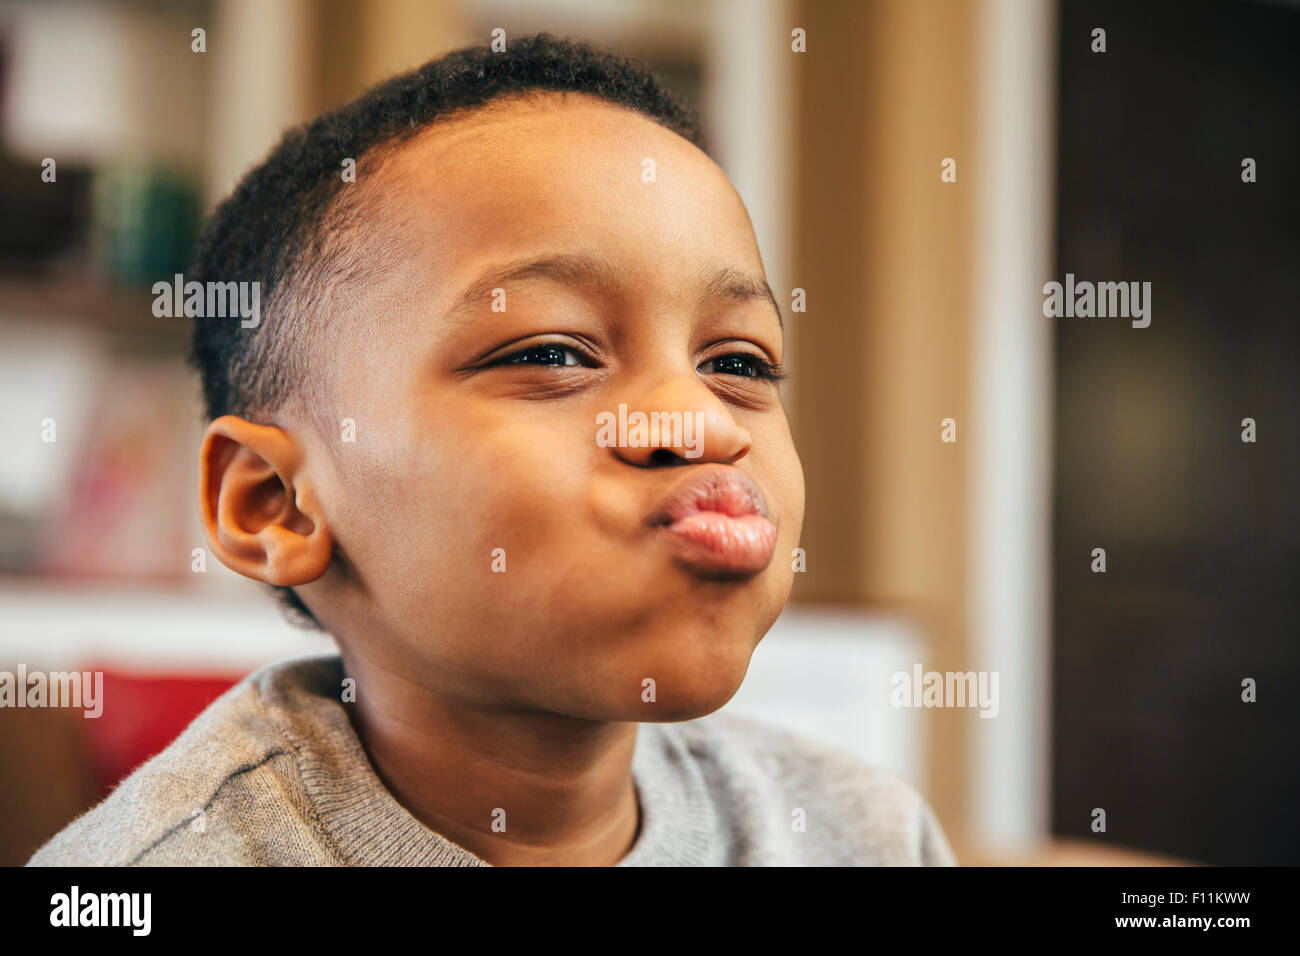 Close up of Black boy making a face Stock Photo